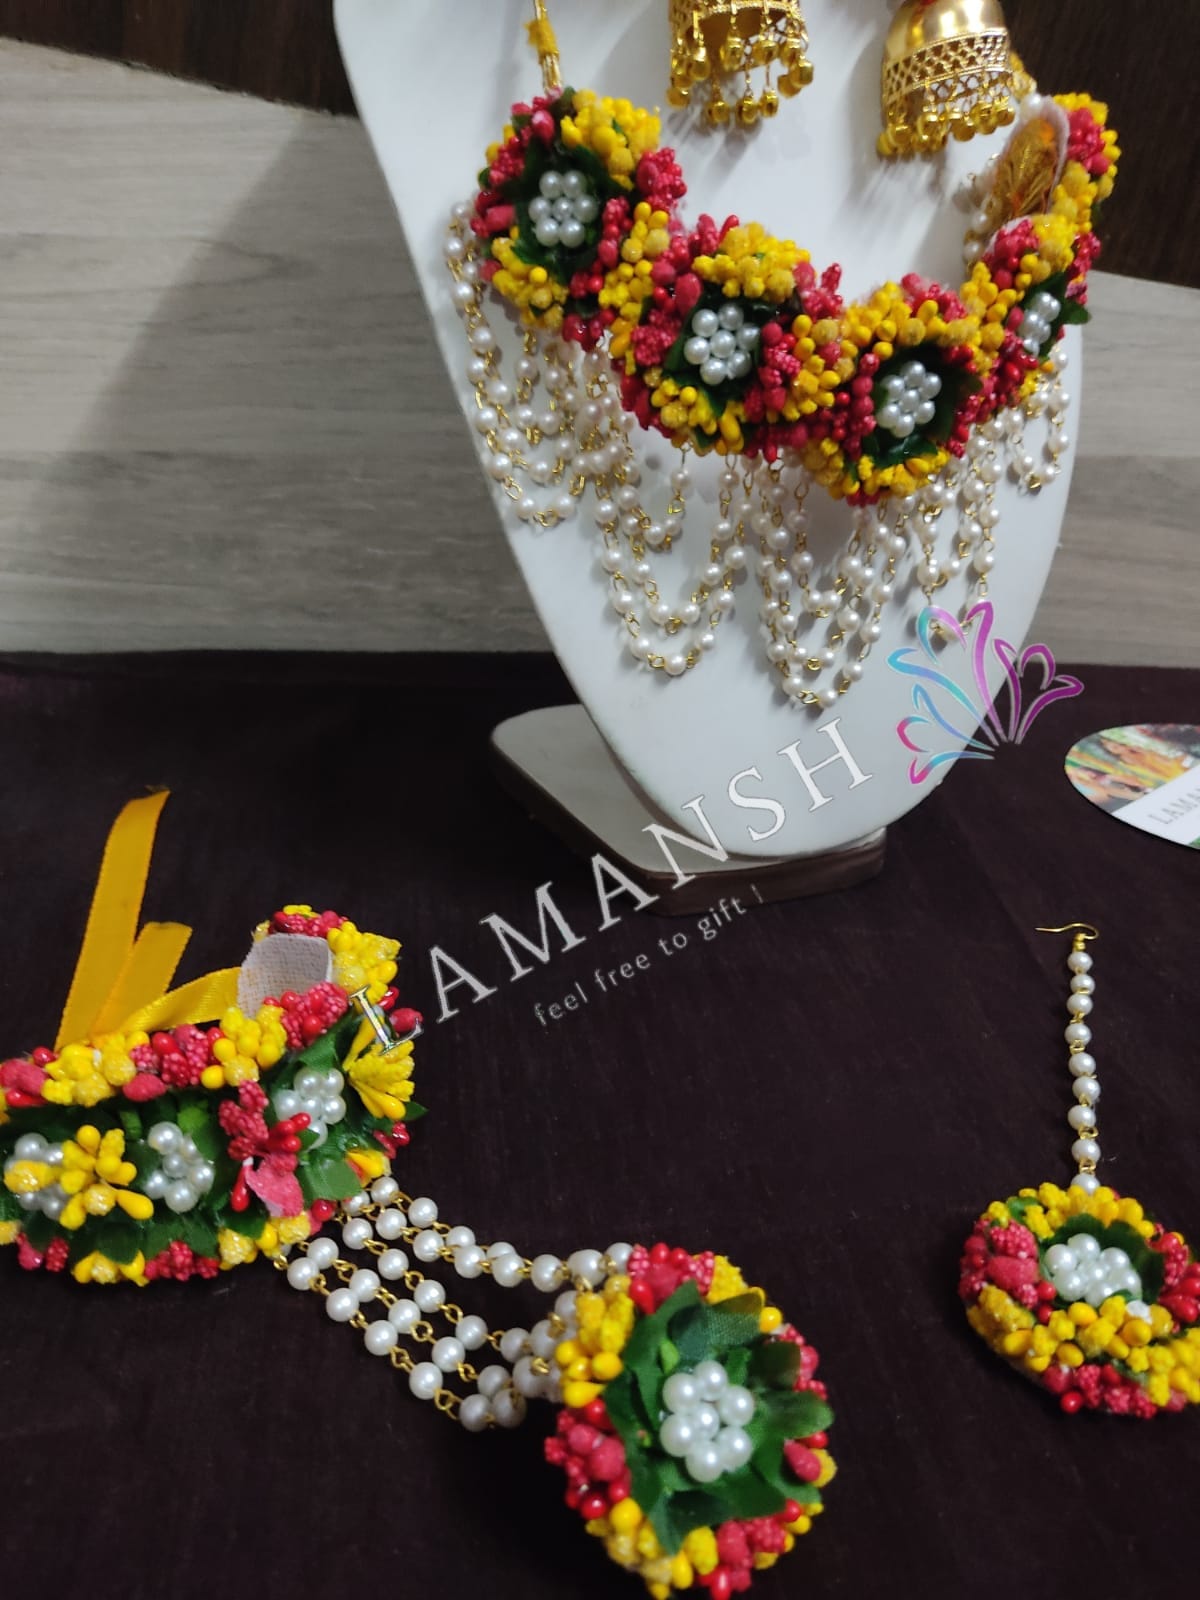 Lamansh latest floral sets 1 Necklace, 2 Earrings, 2 Bracelets Attached With ring & 1 Maangtika Set / Red - Yellow - Green LAMANSH® Special Haldi Mehendi 🌺 Jewellery Set / Floral Jewellery set